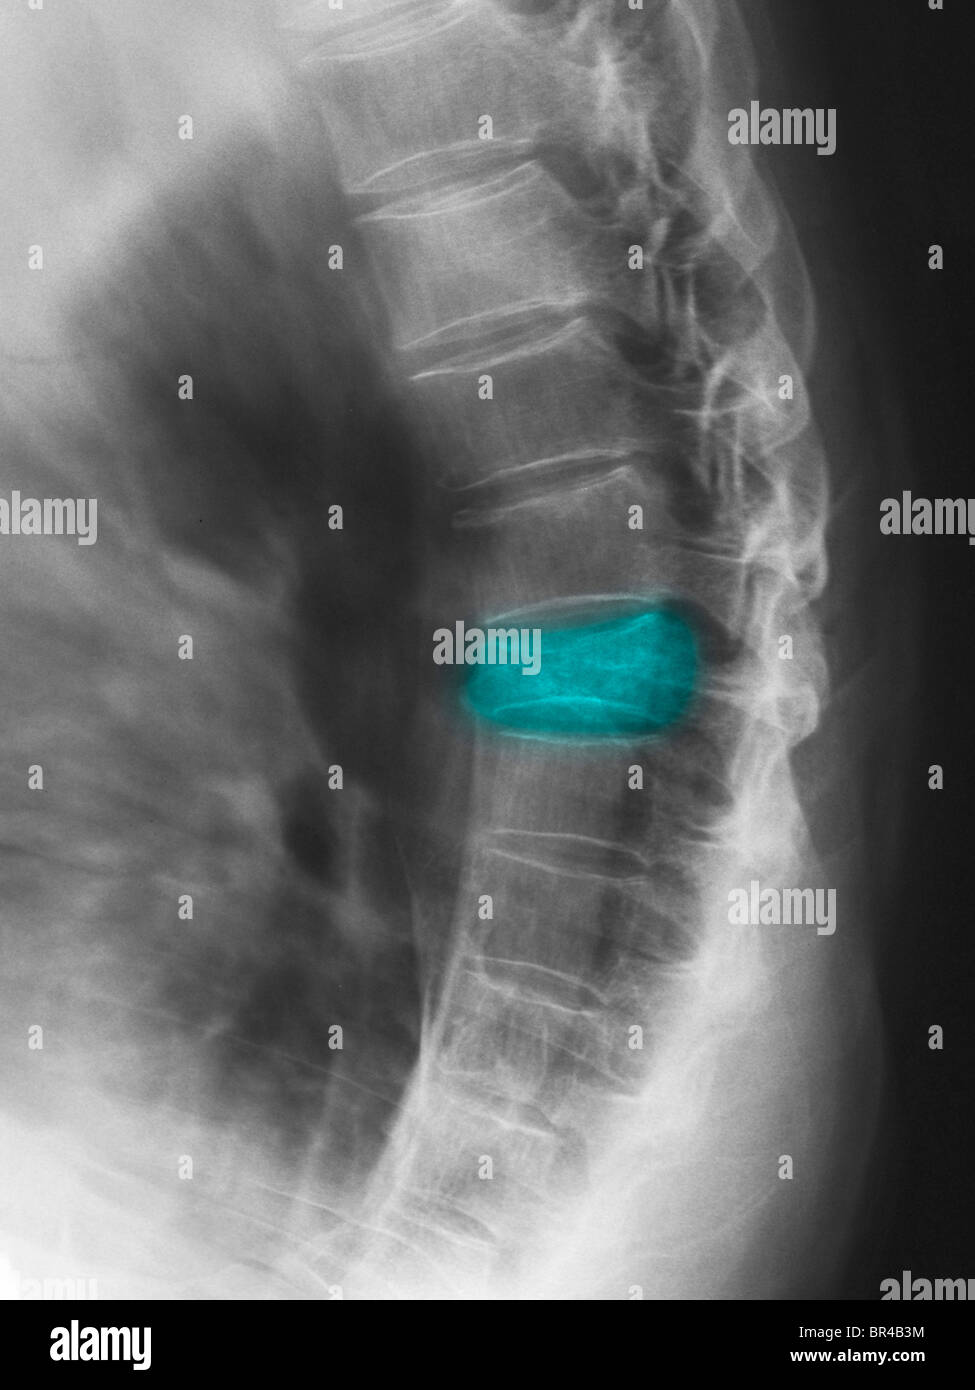 dorsal spine x-ray in lateral view showing a T7 compression fracture in a 77 year old man Stock Photo